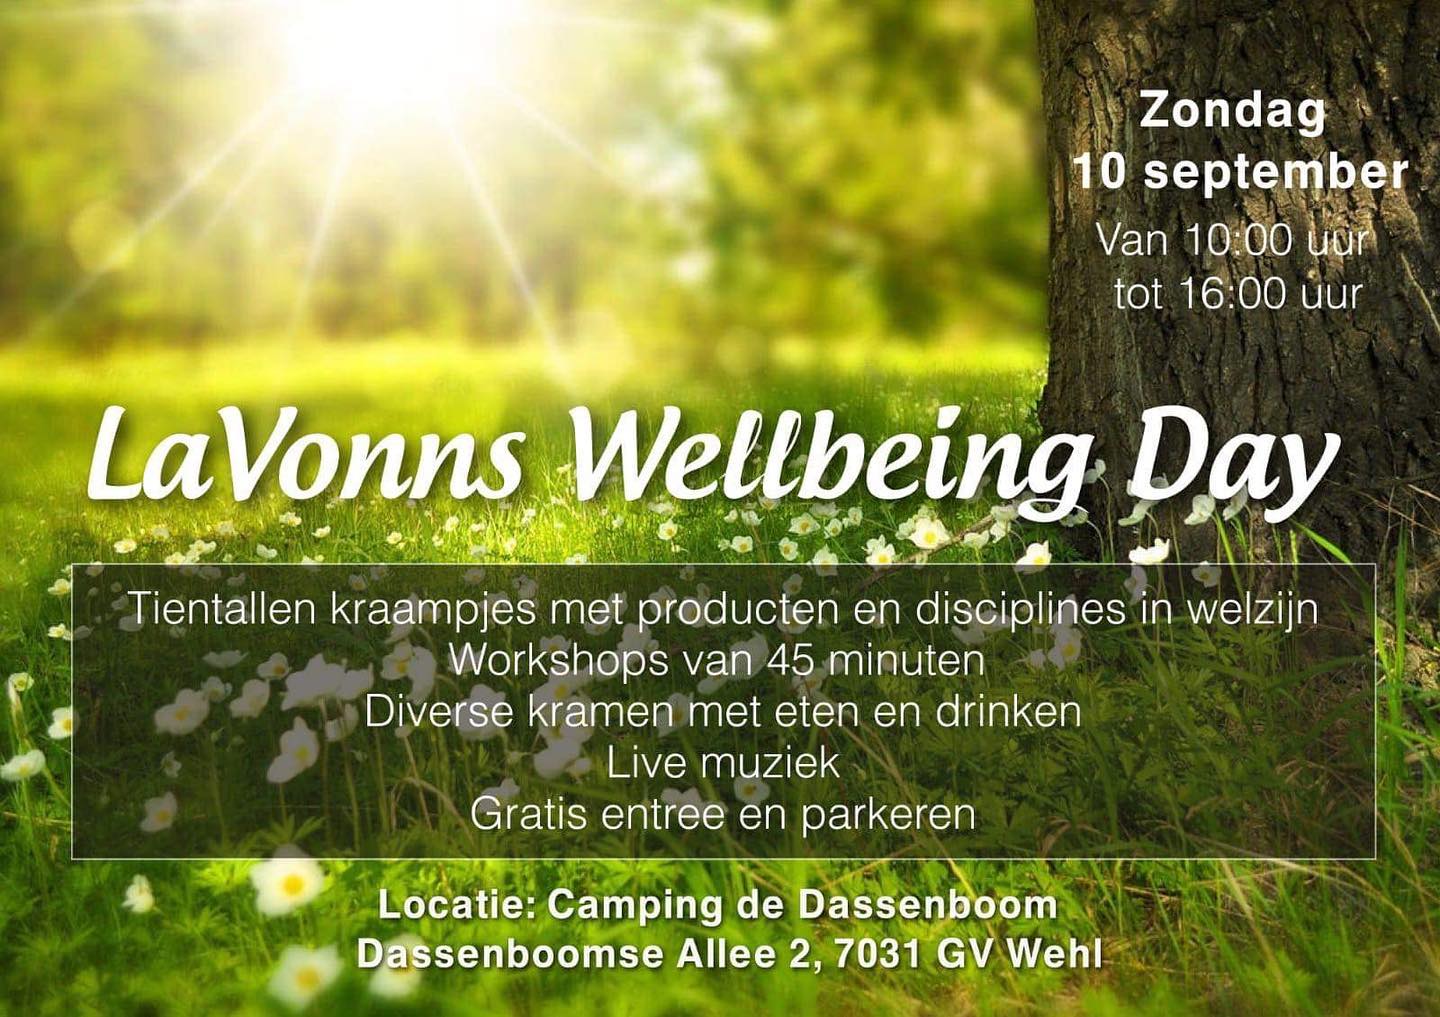 Wellbeing day